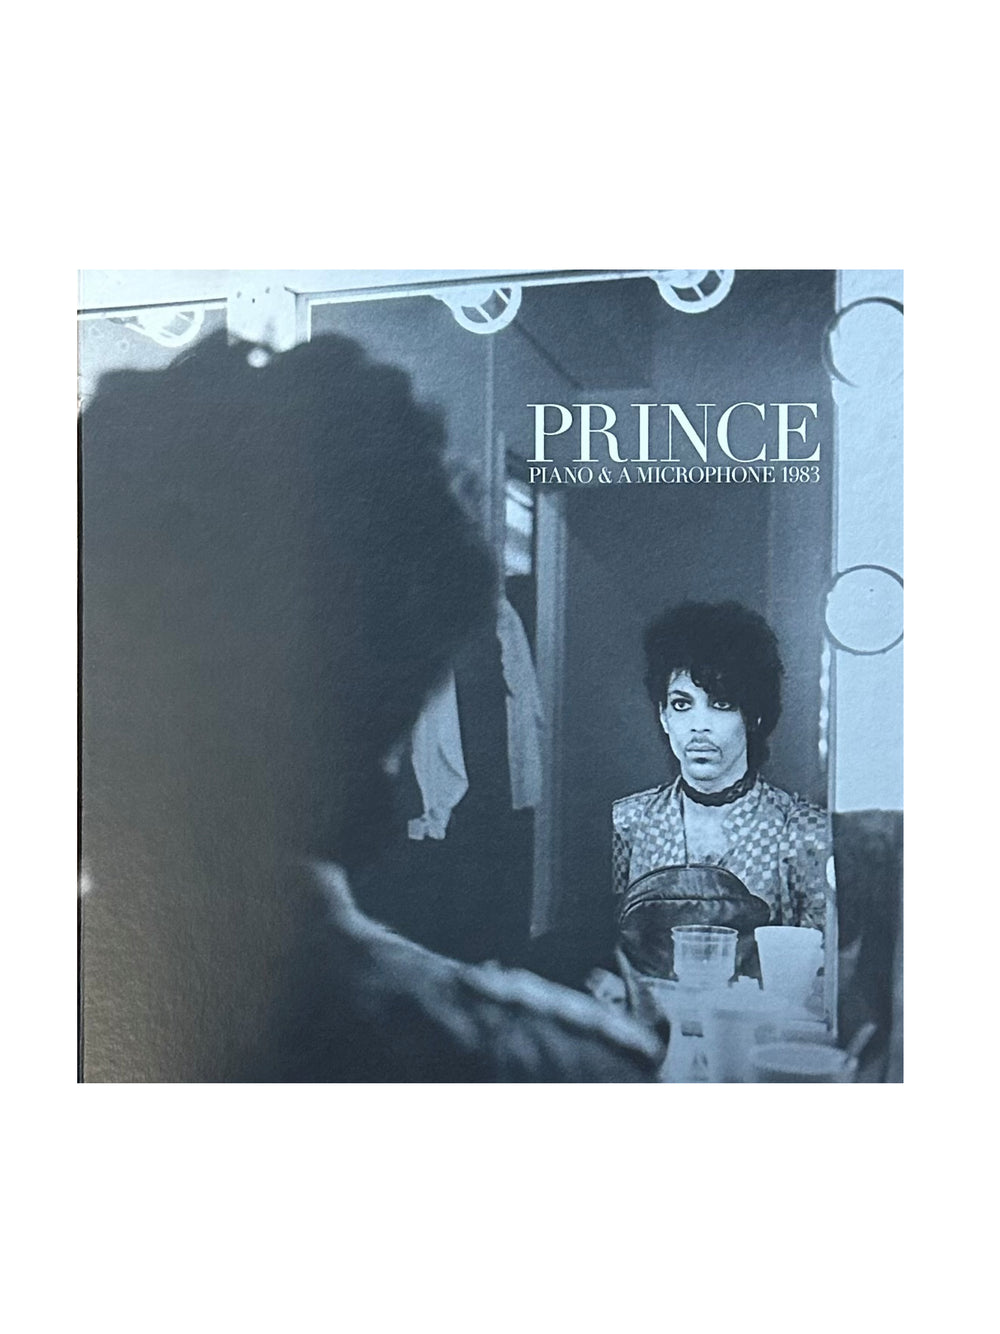 Prince – Piano & A Microphone 1983 Vinyl LP 180 g CD Album Box Set Deluxe Edition Limited Edition : 2018